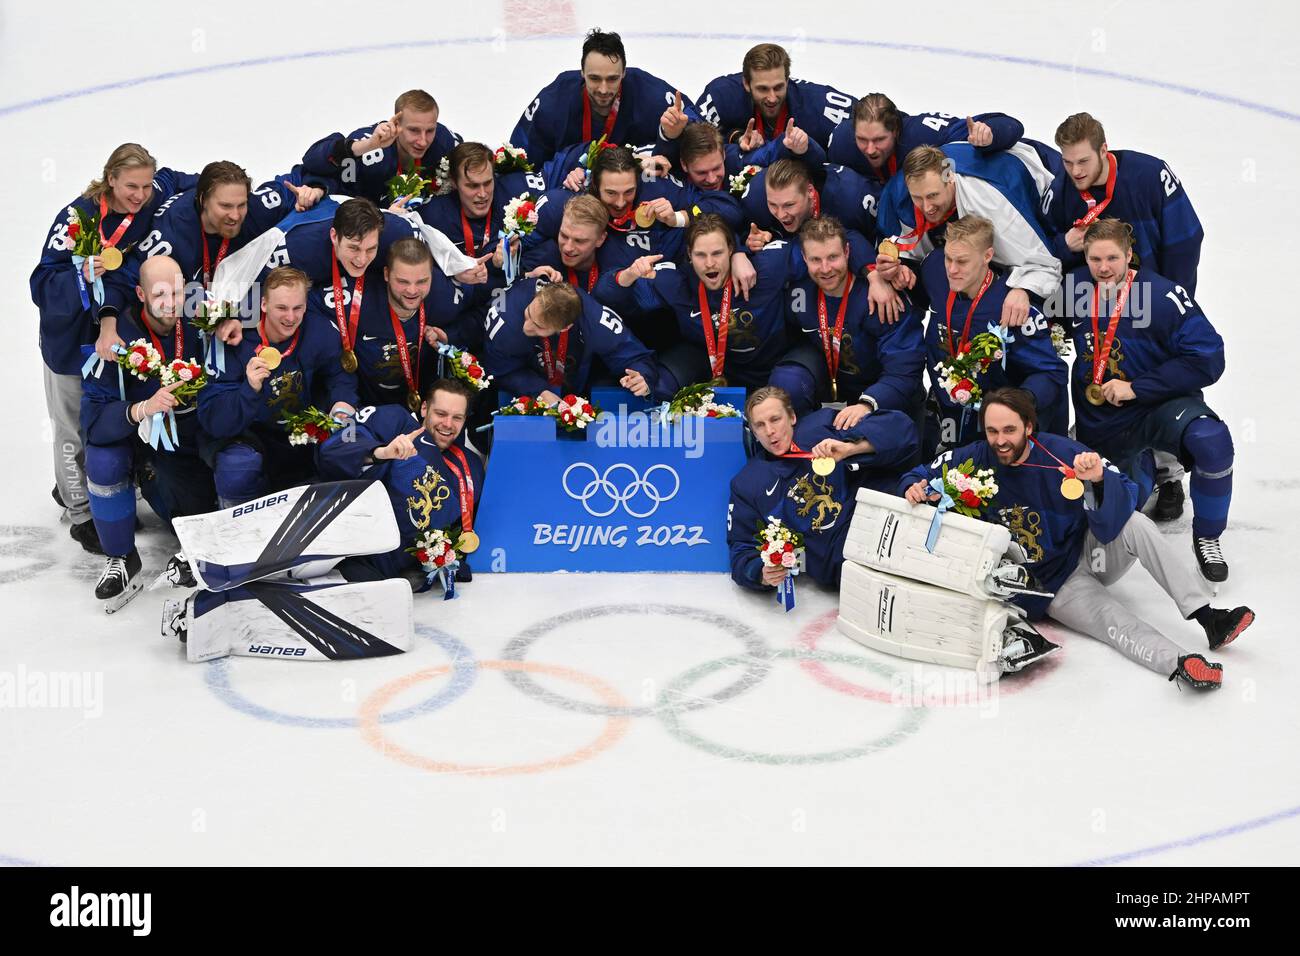 Finland win Olympic gold in men's ice hockey, Beijing 2022 officially ends